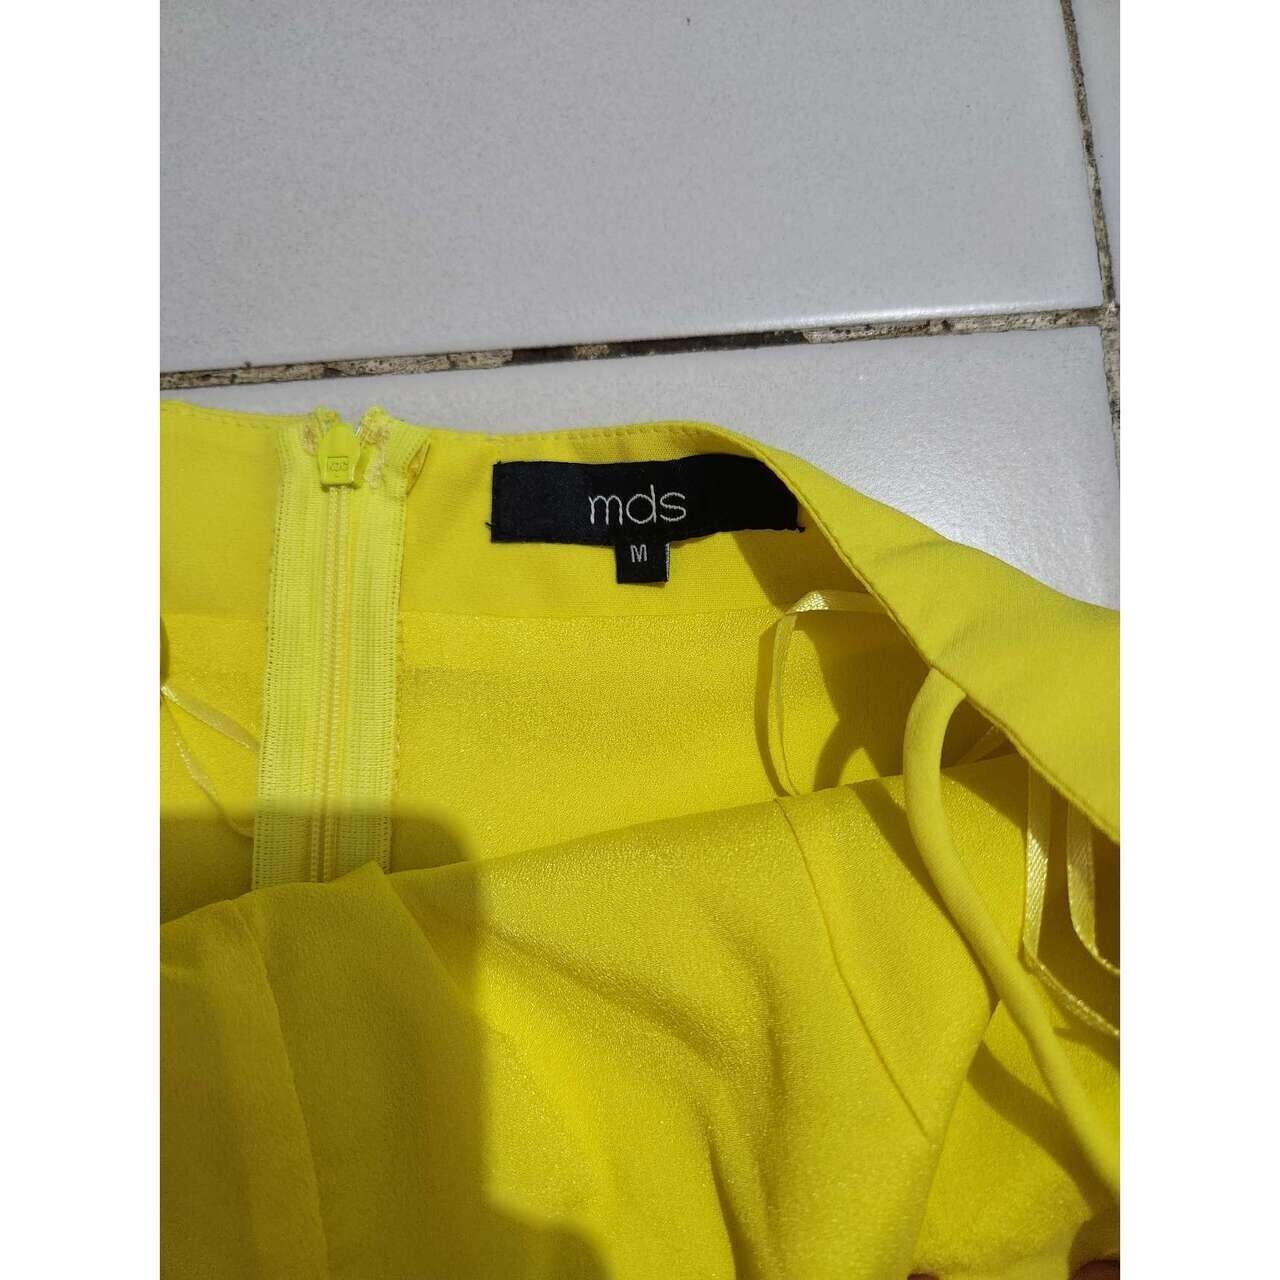 MDS Yellow Blouse